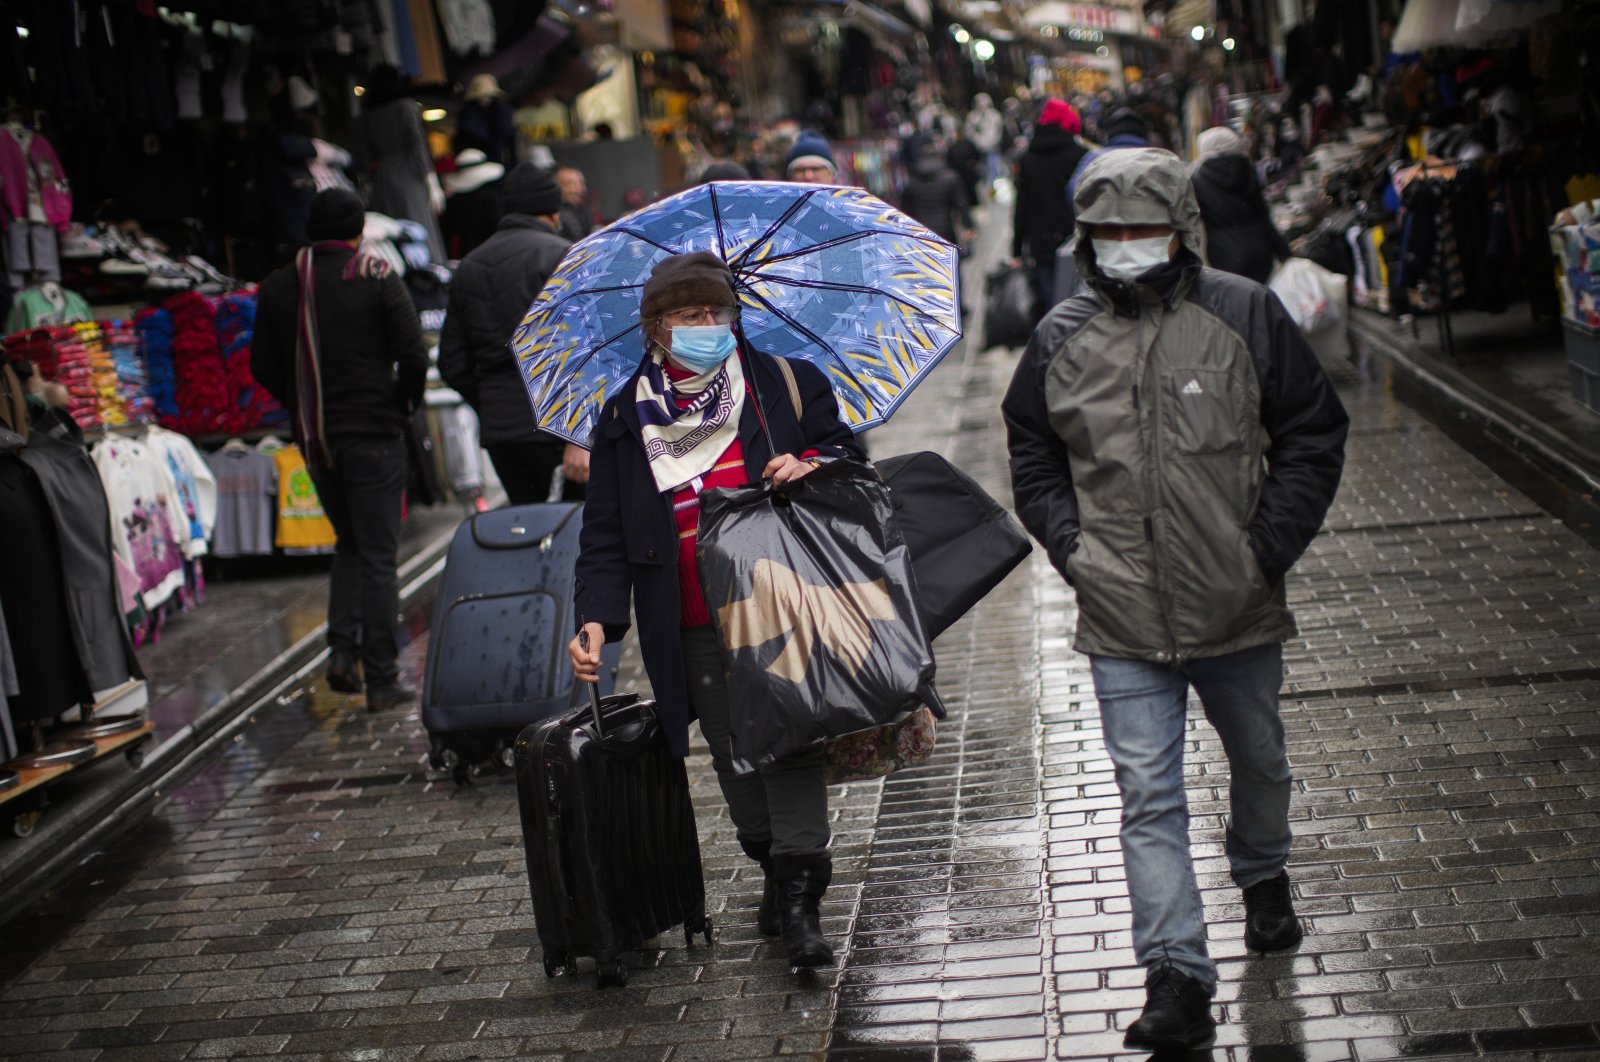 People wearing masks to prevent the spread of COVID-19, walk along a commercial area in Istanbul, Turkey, Jan. 12, 2022. (AP Photo)